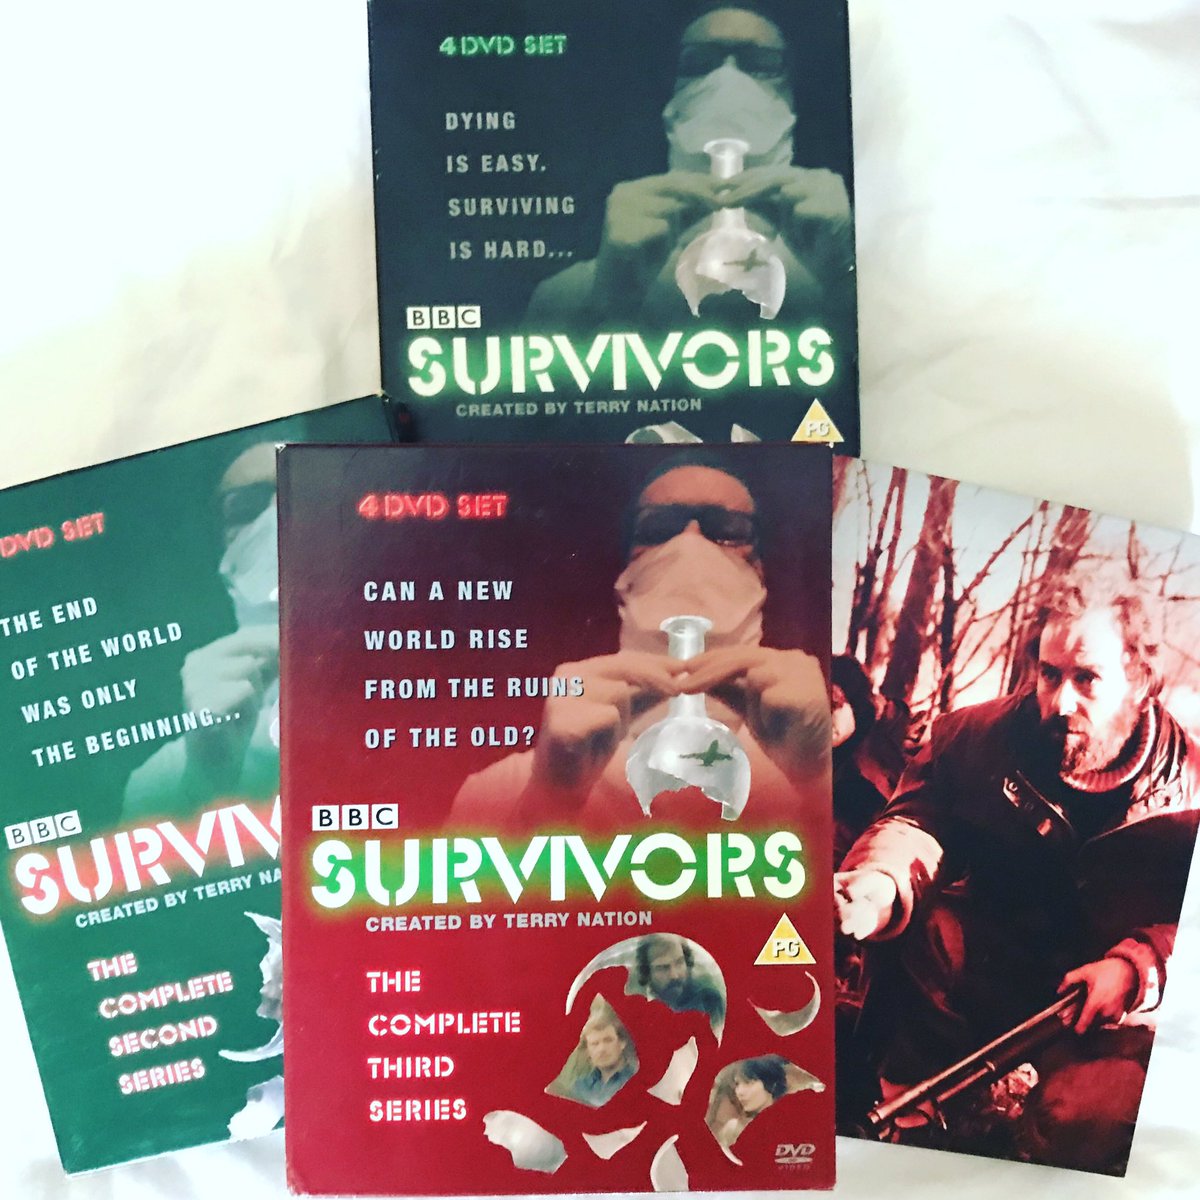 #Survivors diaries. Reached the end of my odyssey. Hard to think that the first and final episodes are even from the same series! The focus evolves quickly. Piecemeal and meandering at times, but when it’s good, it’s very, very good. #TerryNation #DenisLill #1970sBritishTV